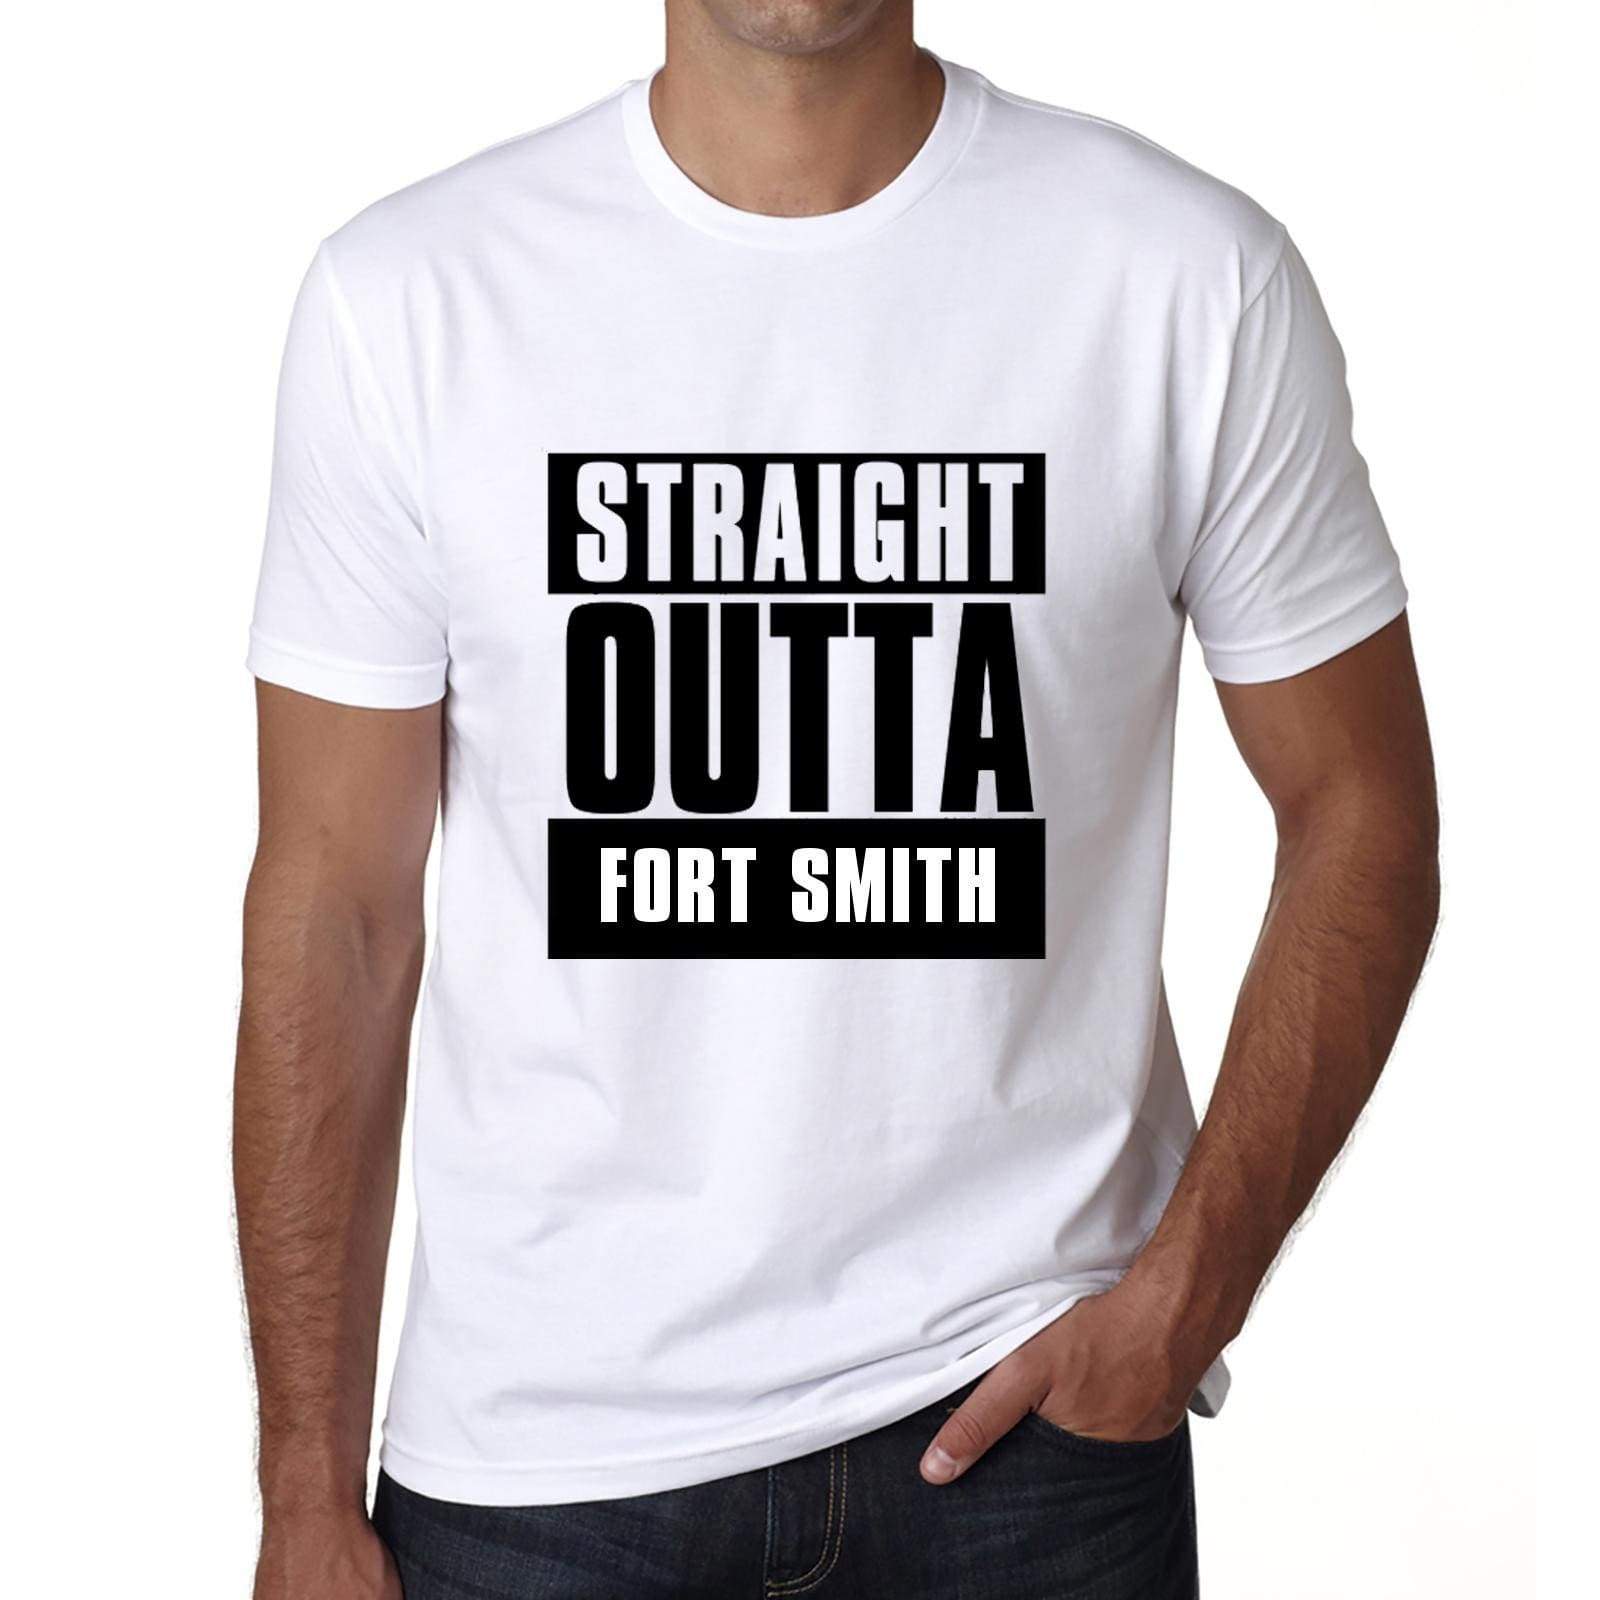 Straight Outta Fort Smith Mens Short Sleeve Round Neck T-Shirt 00027 - White / S - Casual